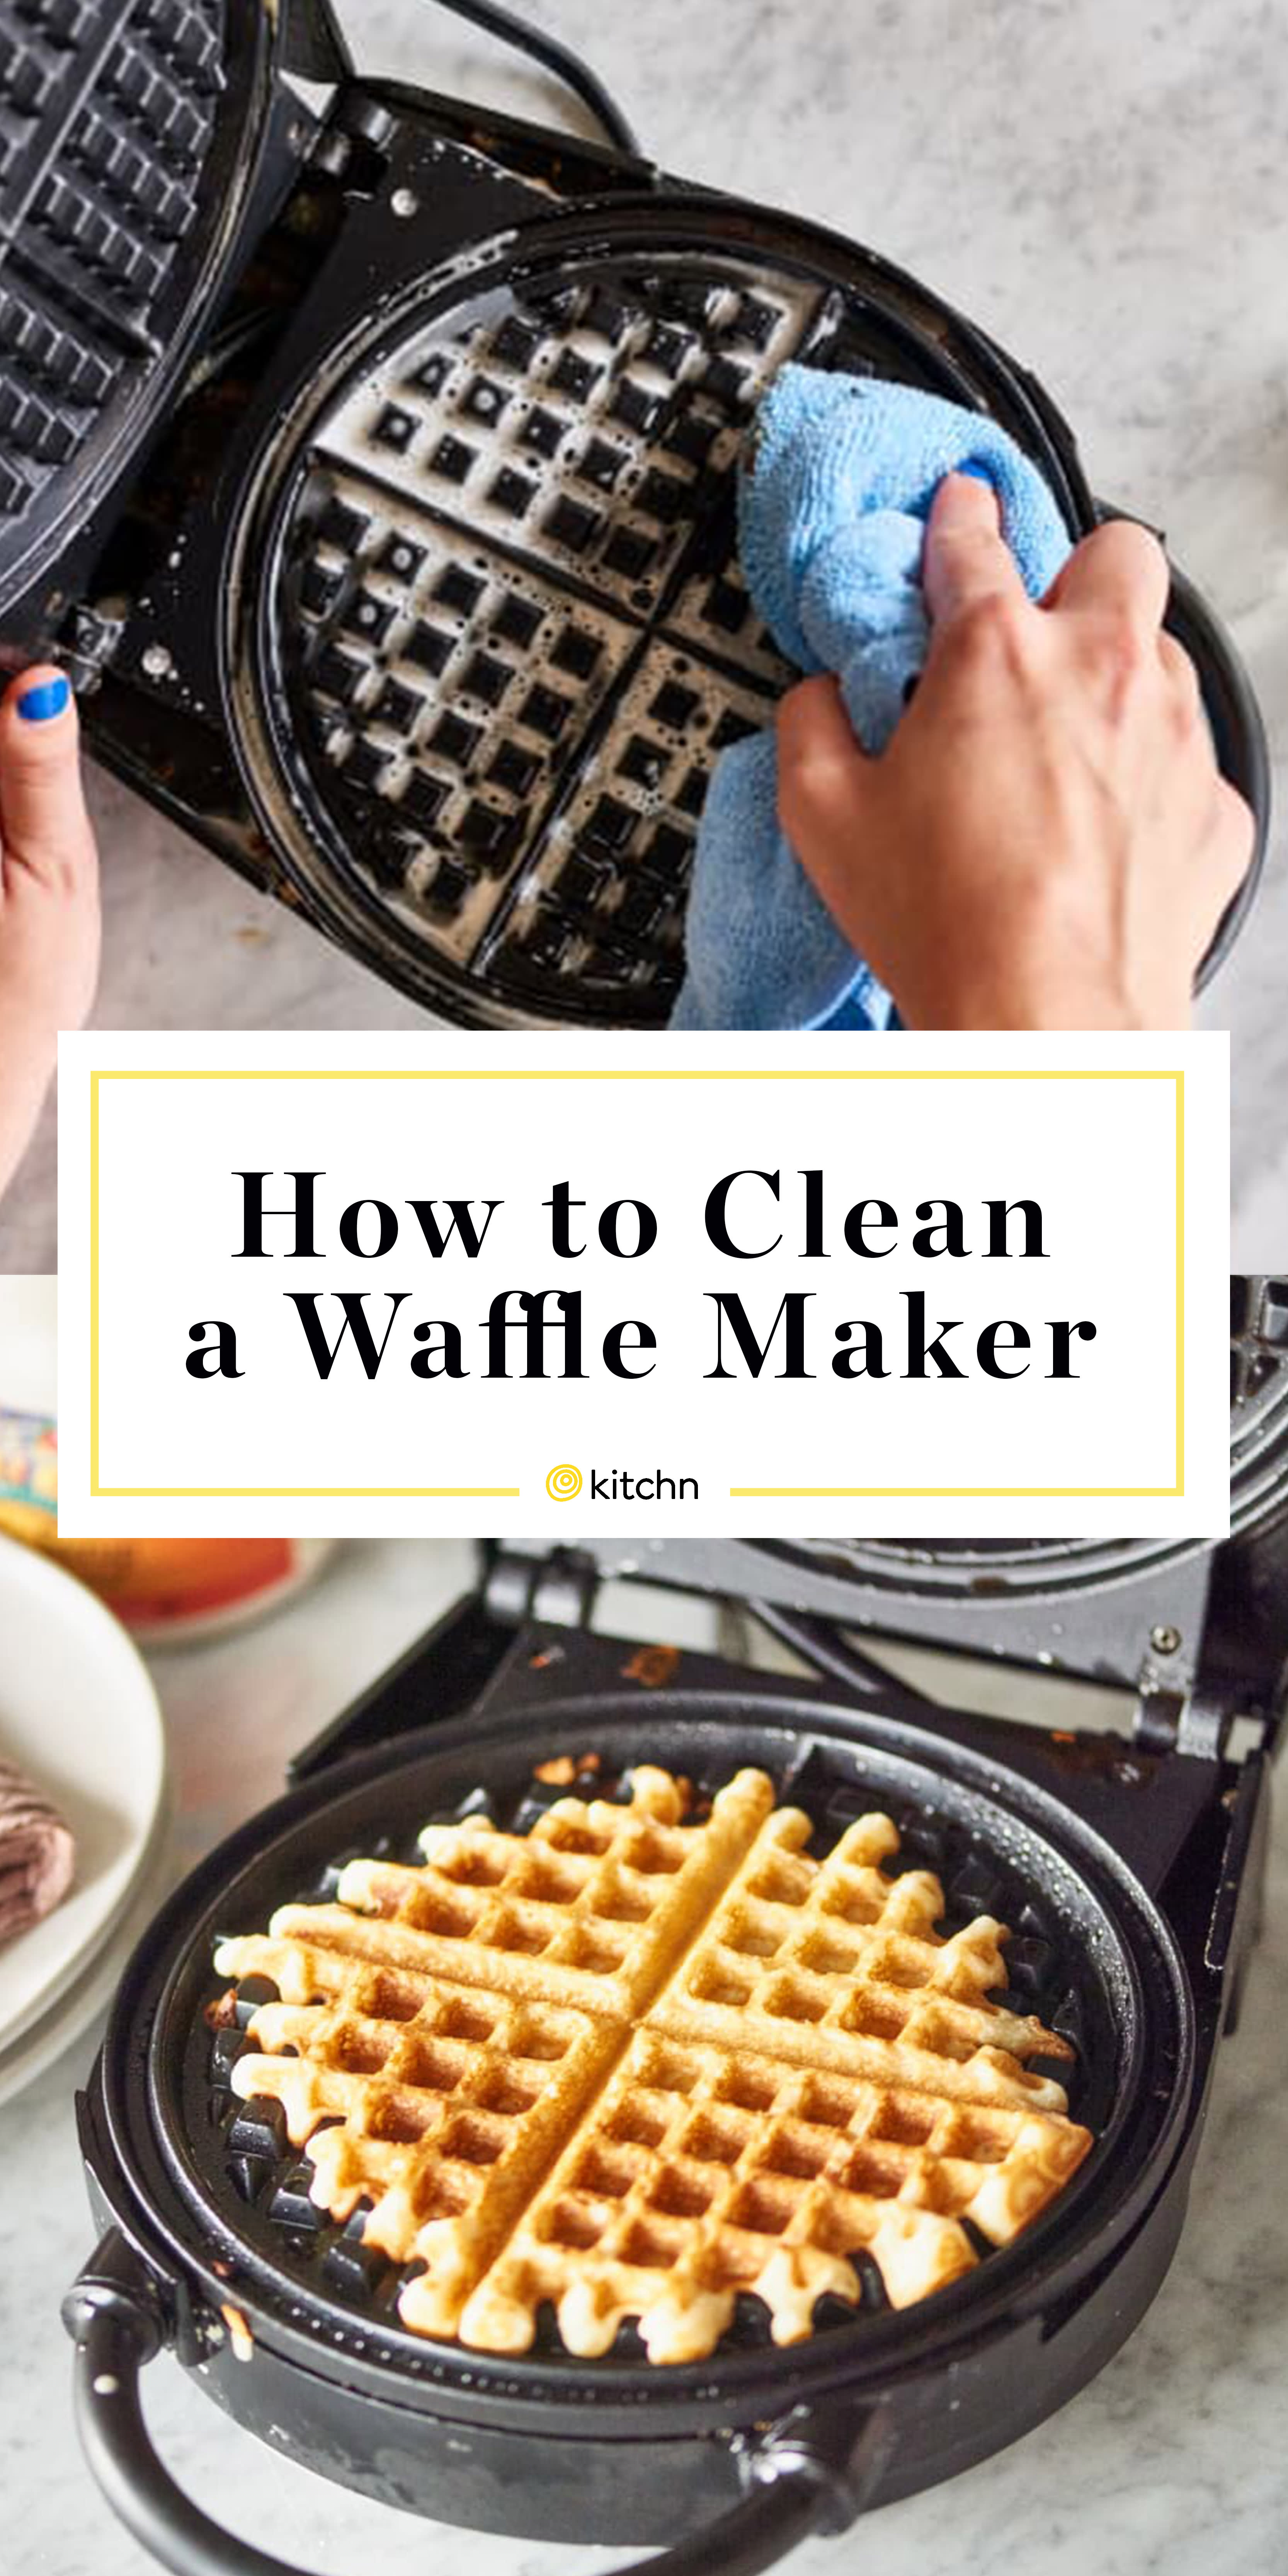 https://cdn.apartmenttherapy.info/image/upload/v1567174724/k/Photo/Lifestyle/2019-09-how-to-clean-a-waffle-iron/howtocleanawafflemaker.jpg